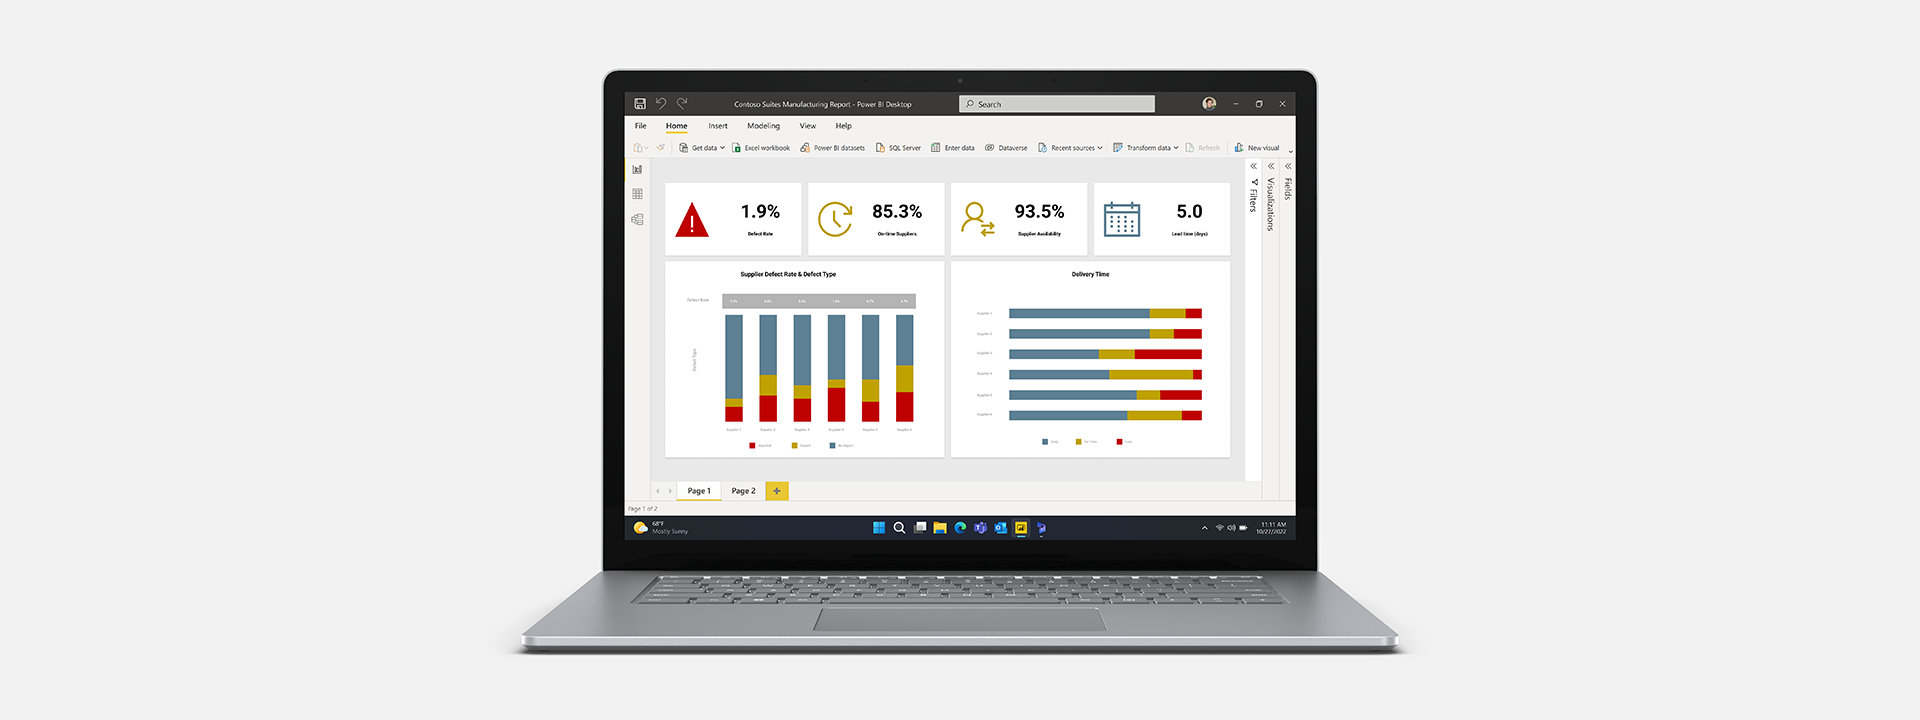 Surface Laptop 5 for Business with Microsoft Power BI on the screen.